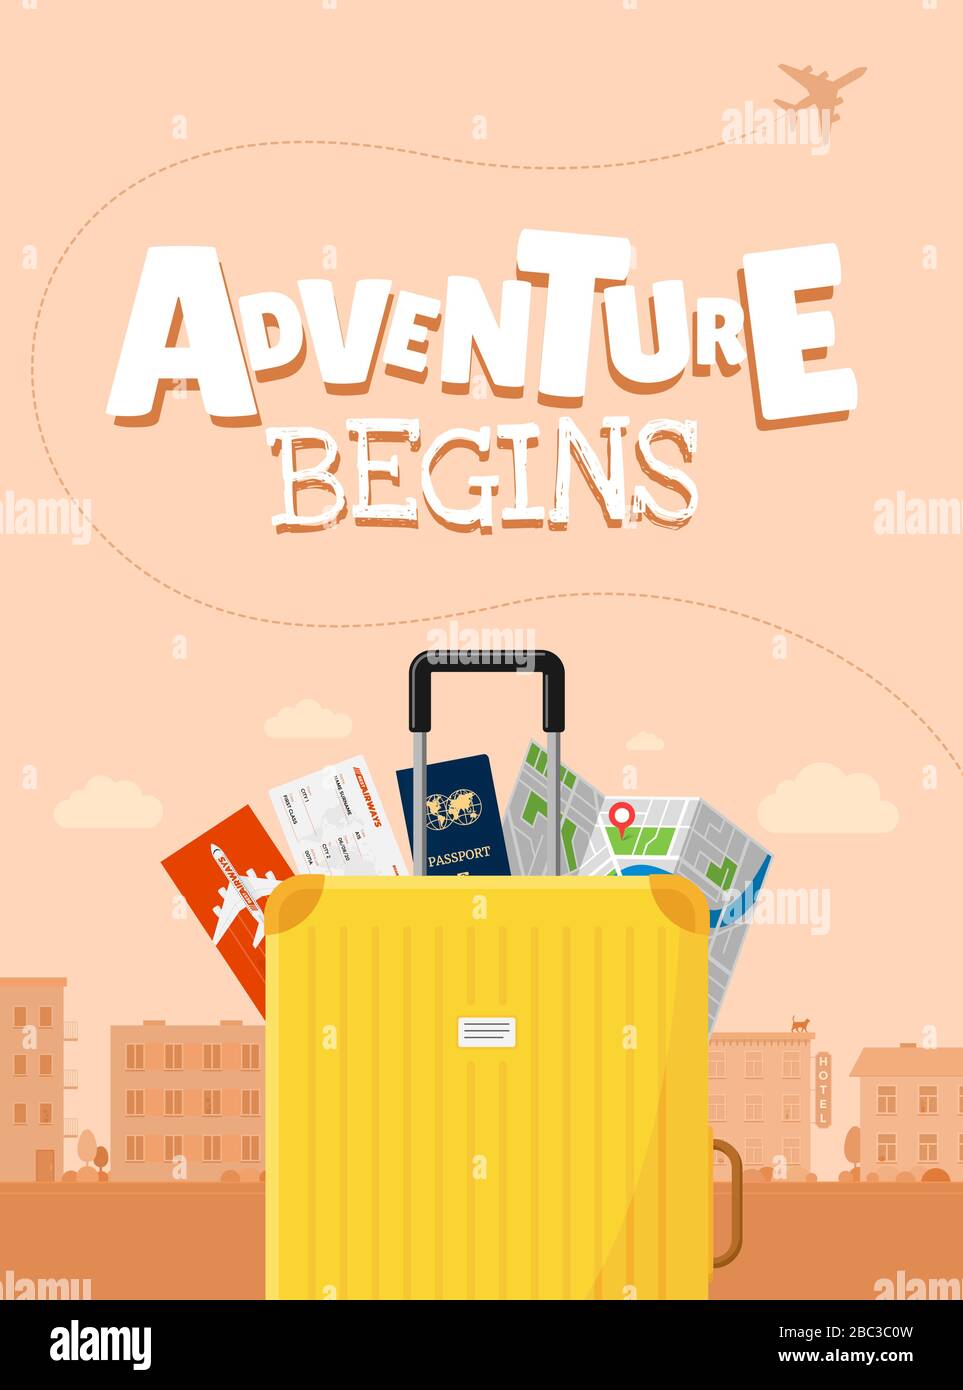 Adventure begins advertising vacation travelling poster design concept. Suitcase luggage with map flight ticket and passport. Different touristic elements and airplane path vector illustration poster Stock Vector